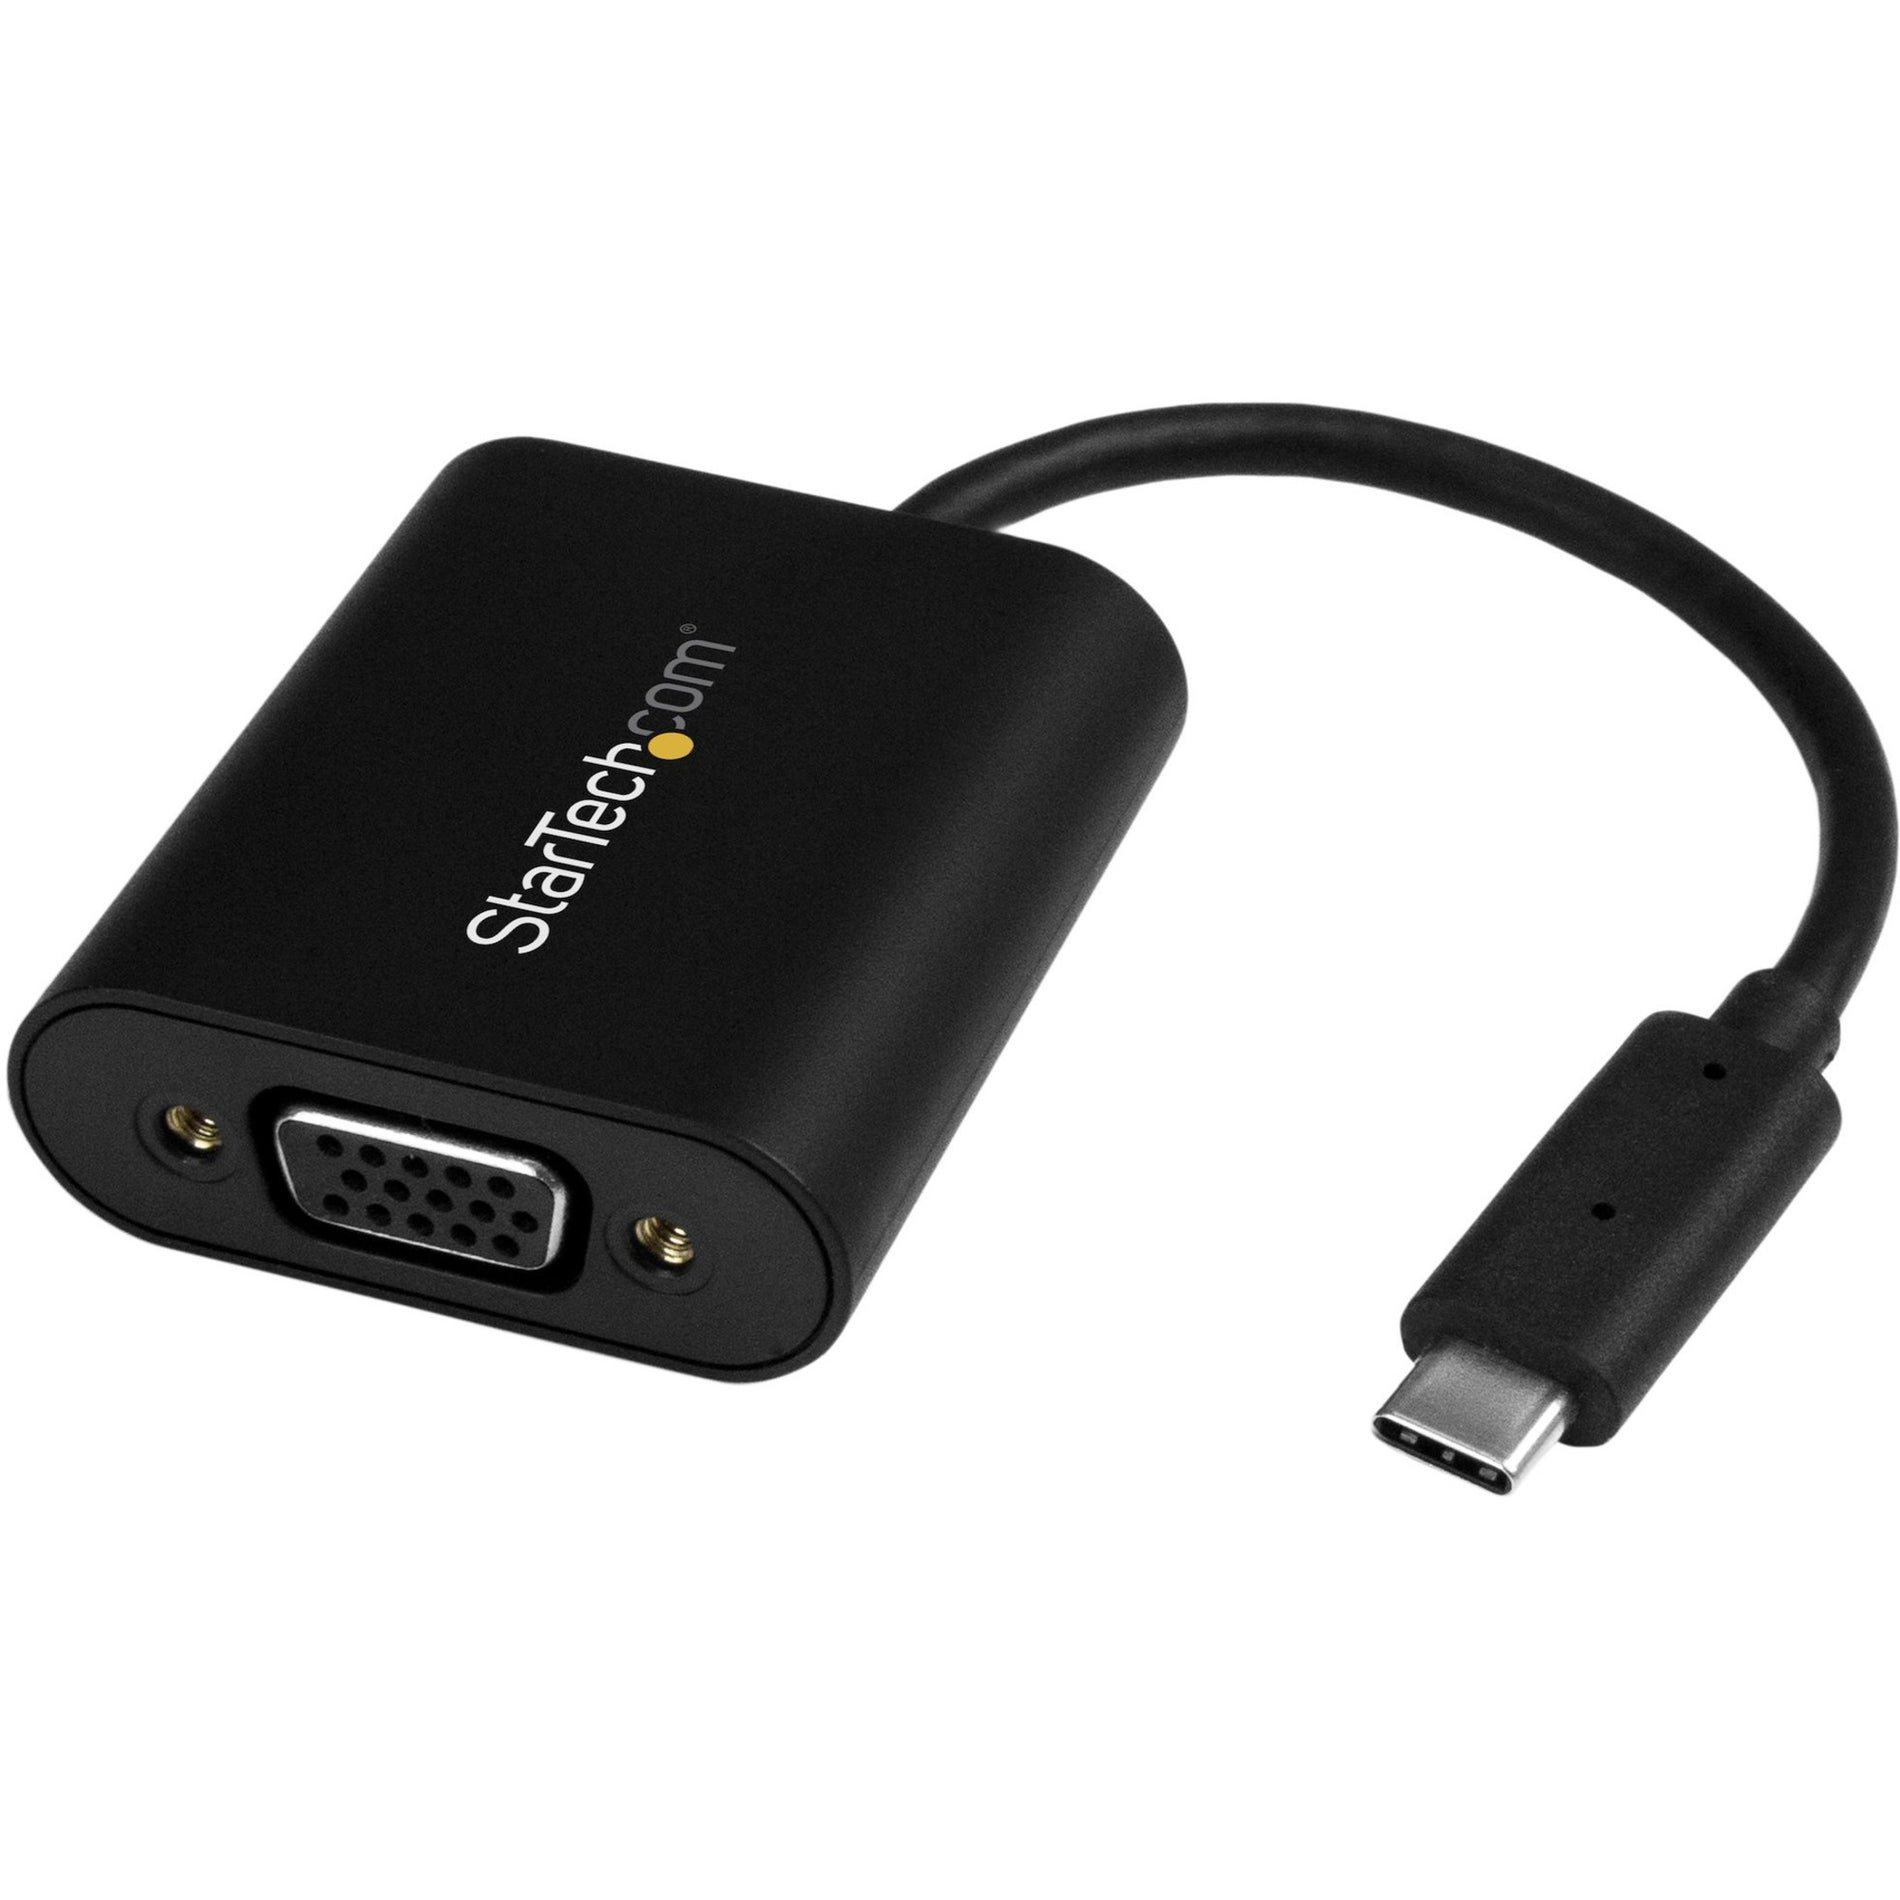 StarTech.com CDP2VGASA USB-C to VGA Adapter - with Presentation Mode Switch - 1920x1200, Reversible, TAA Compliant